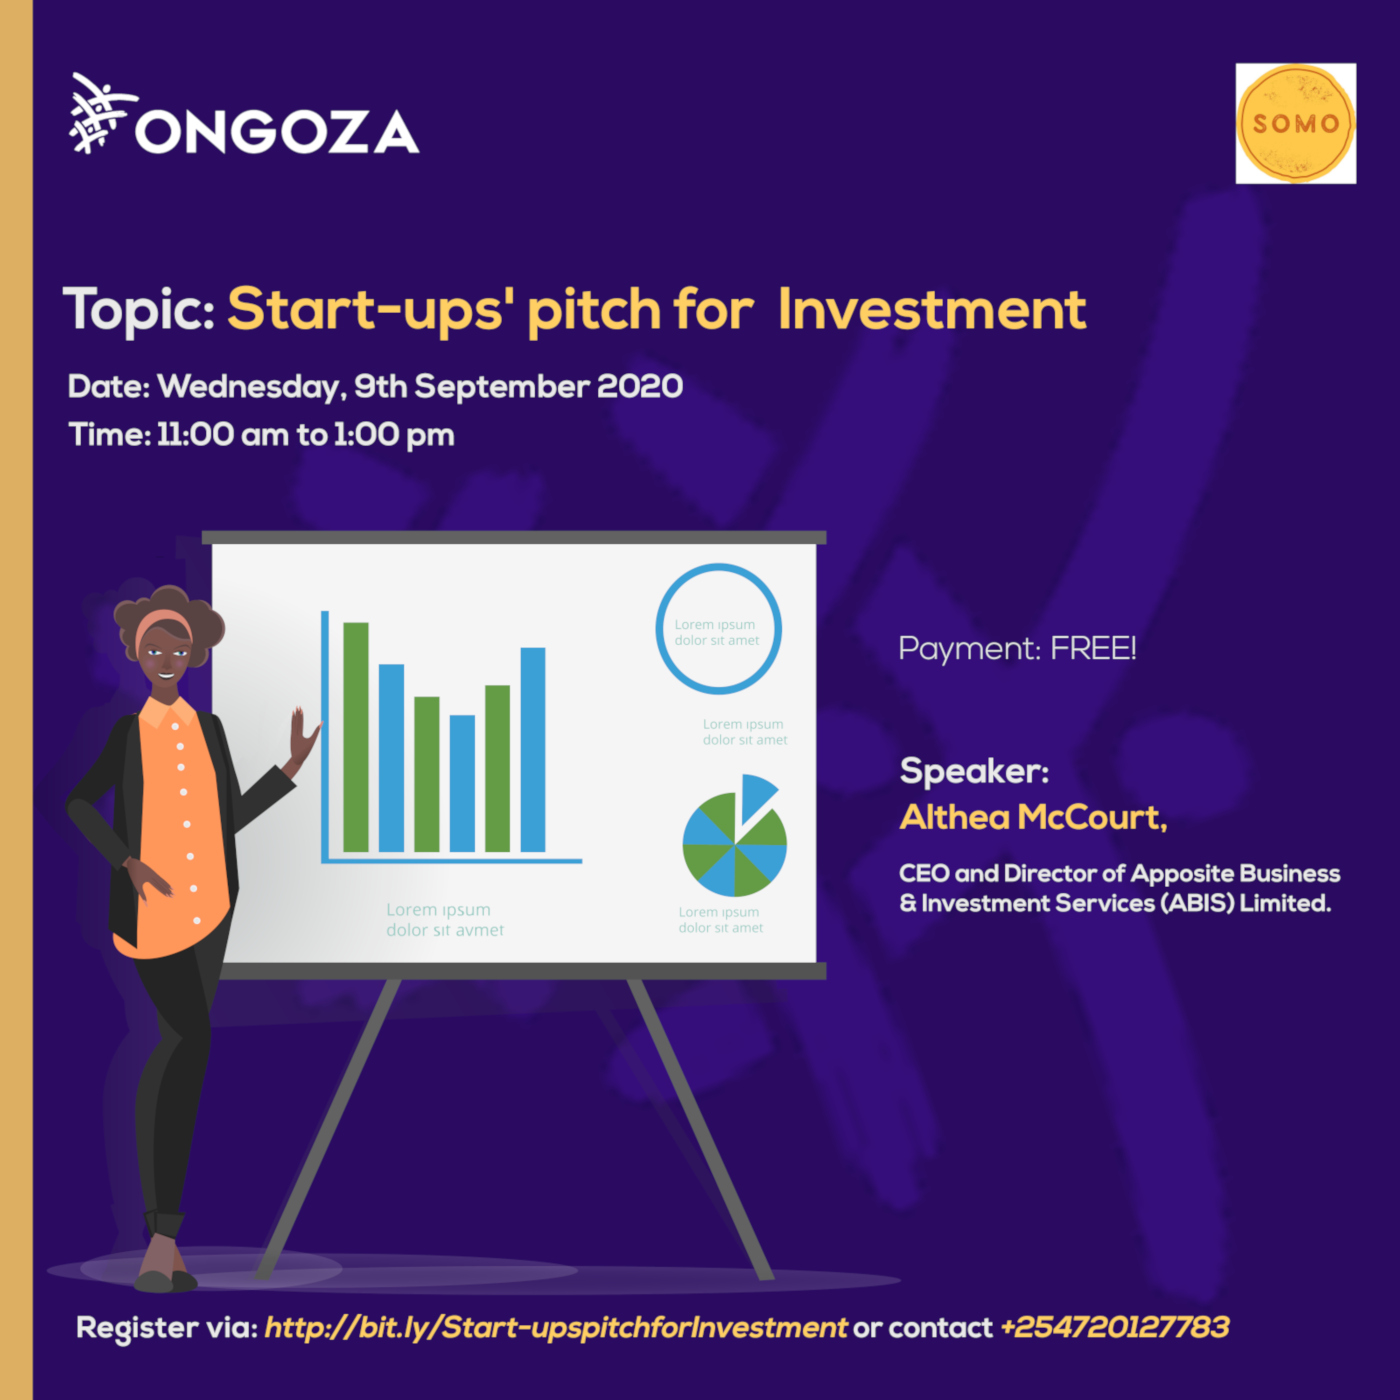 Somo Ongoza Webinar on Startups' pitch for Investment